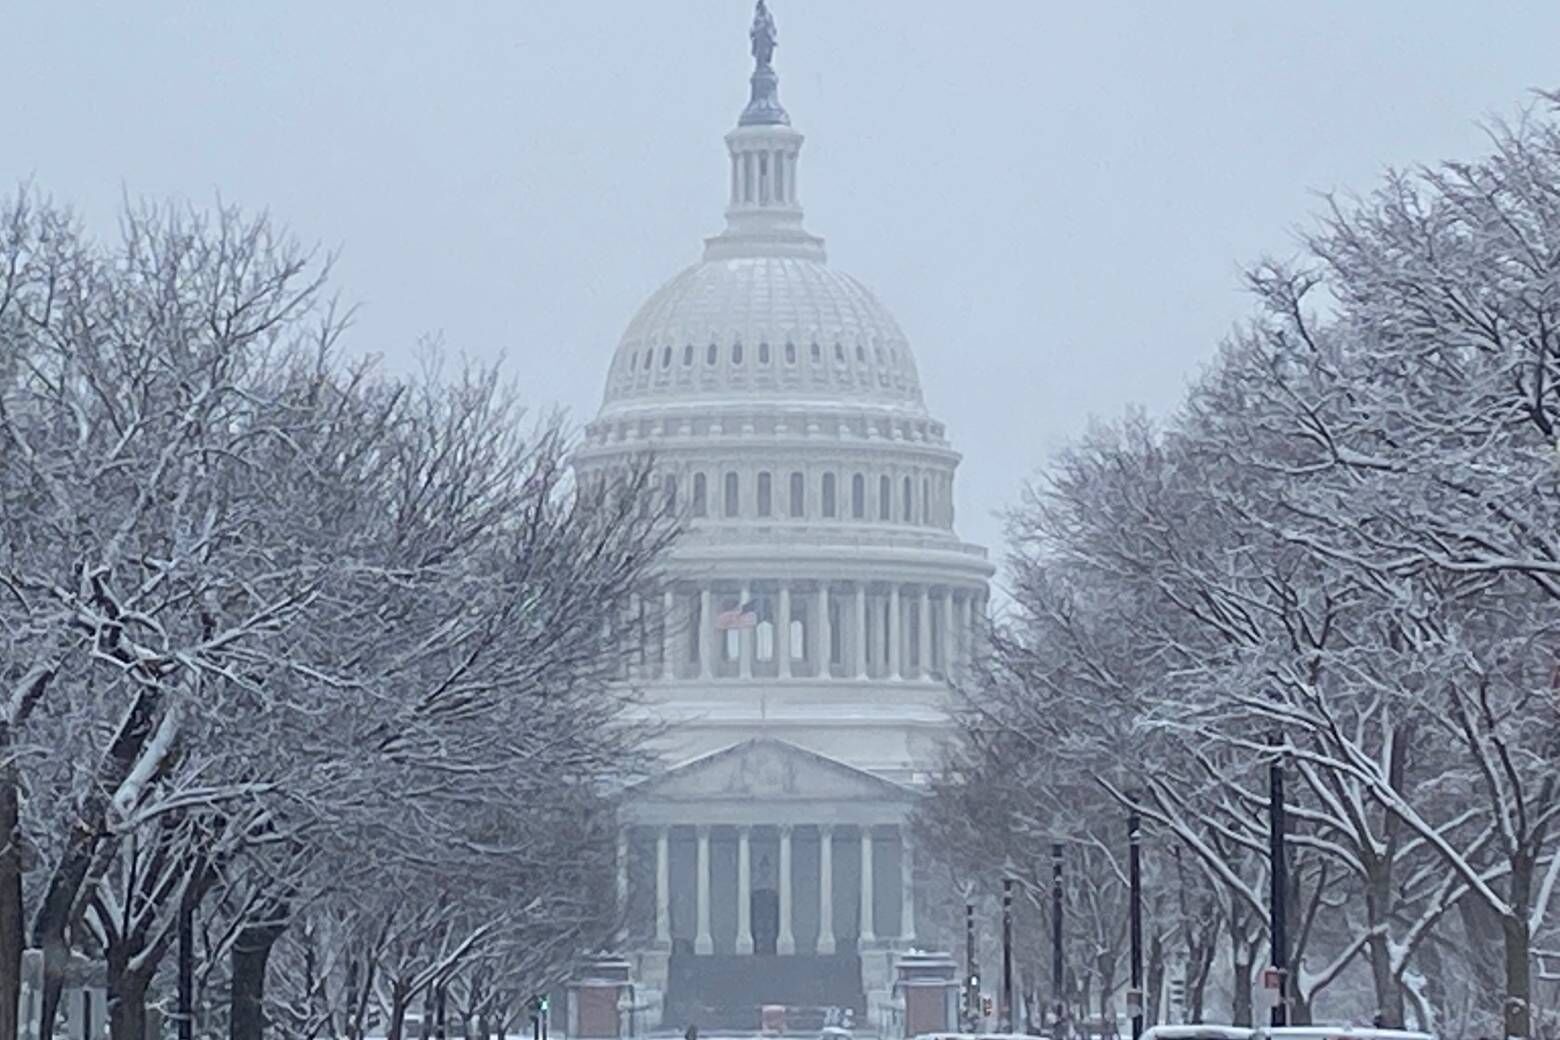 The D.C. area could see a snowy and windy Presidents Day weekend